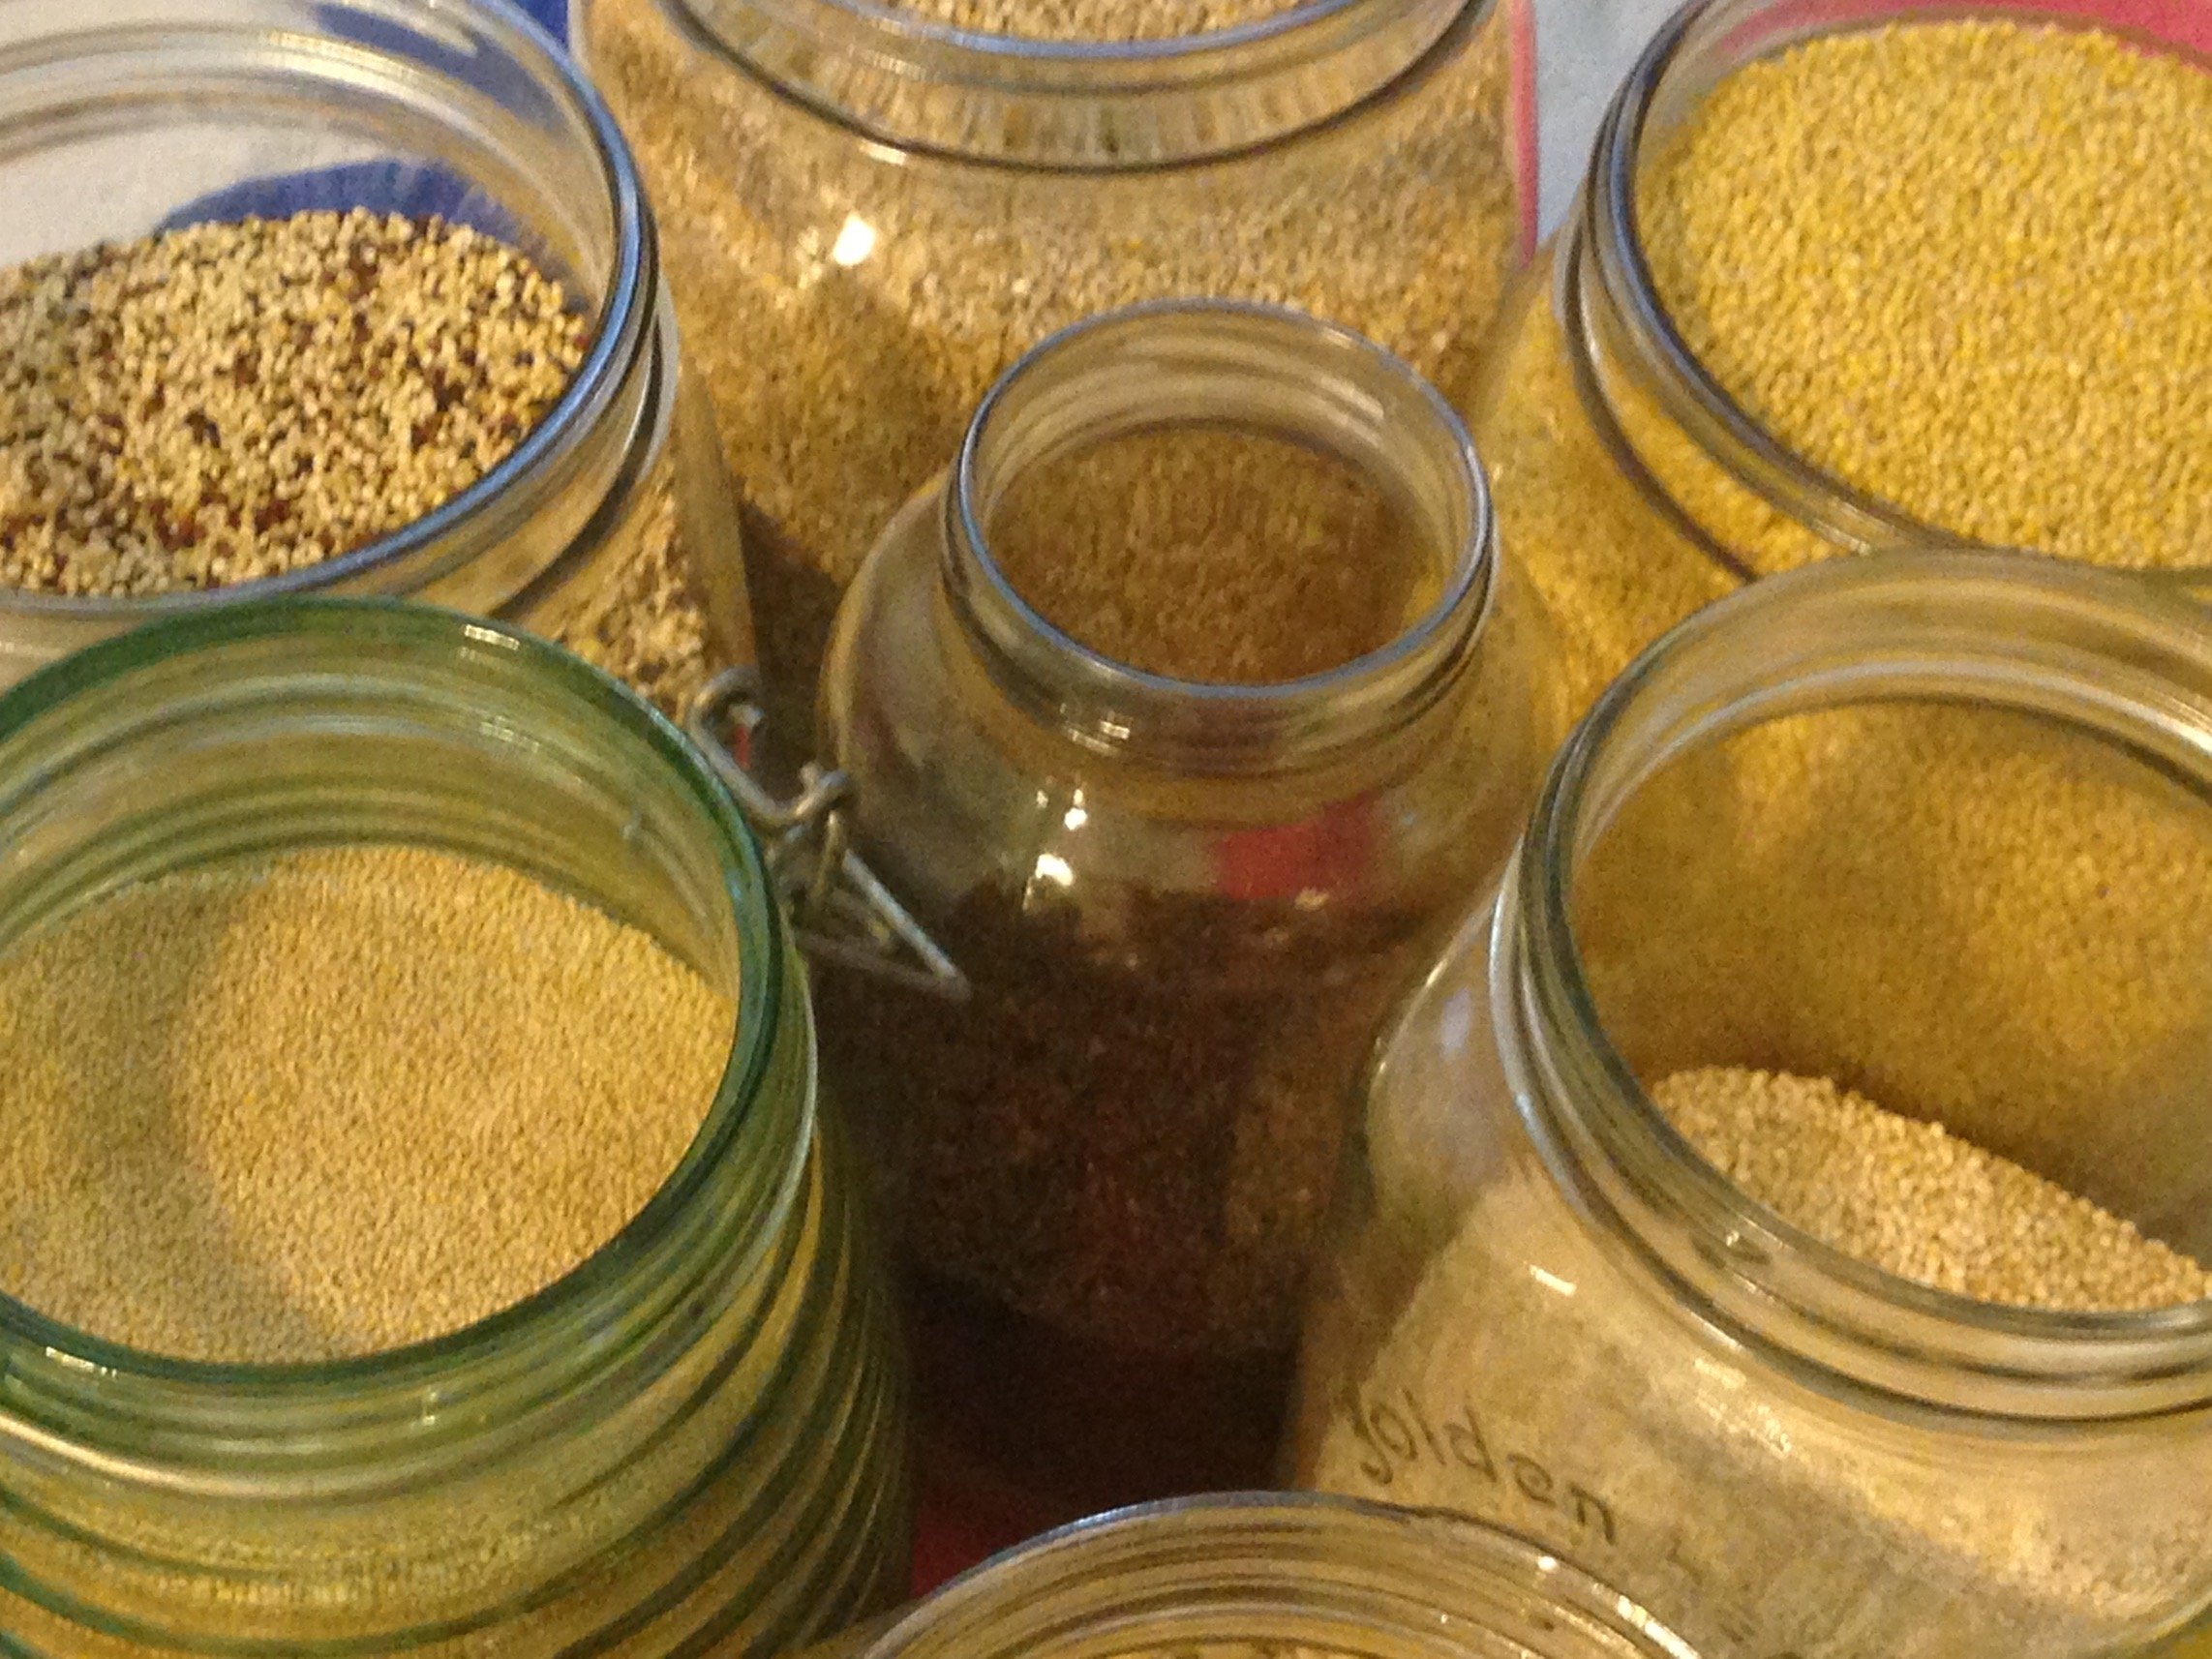 Variety of whole grains in jars